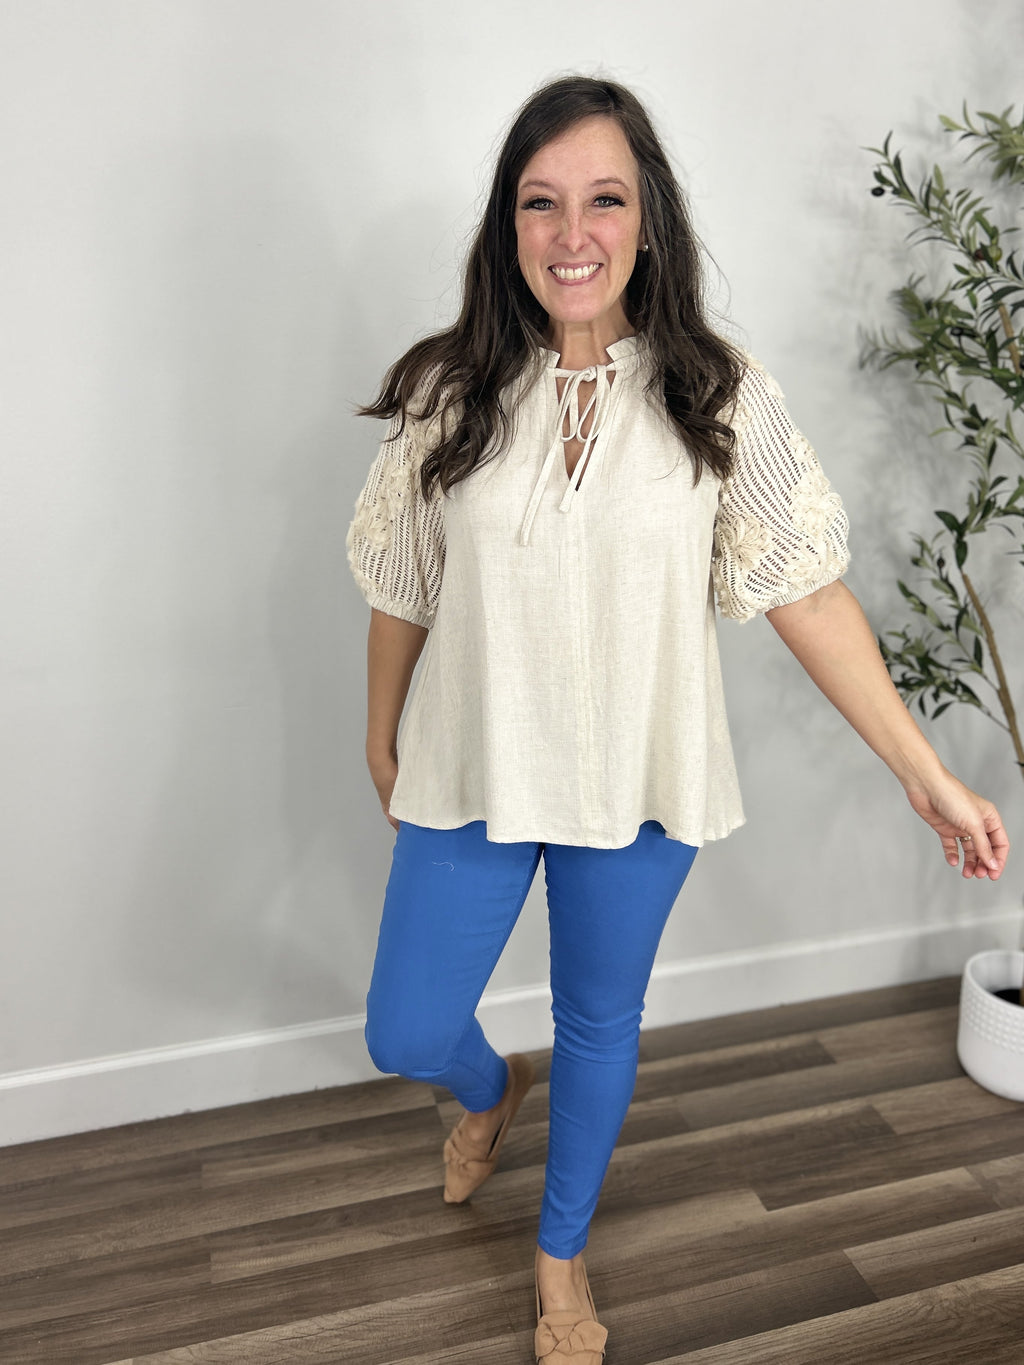 Everly v neck crochet sleeve top paired with blue Fletcher hyper stretch skinny jeans and taupe sandals.